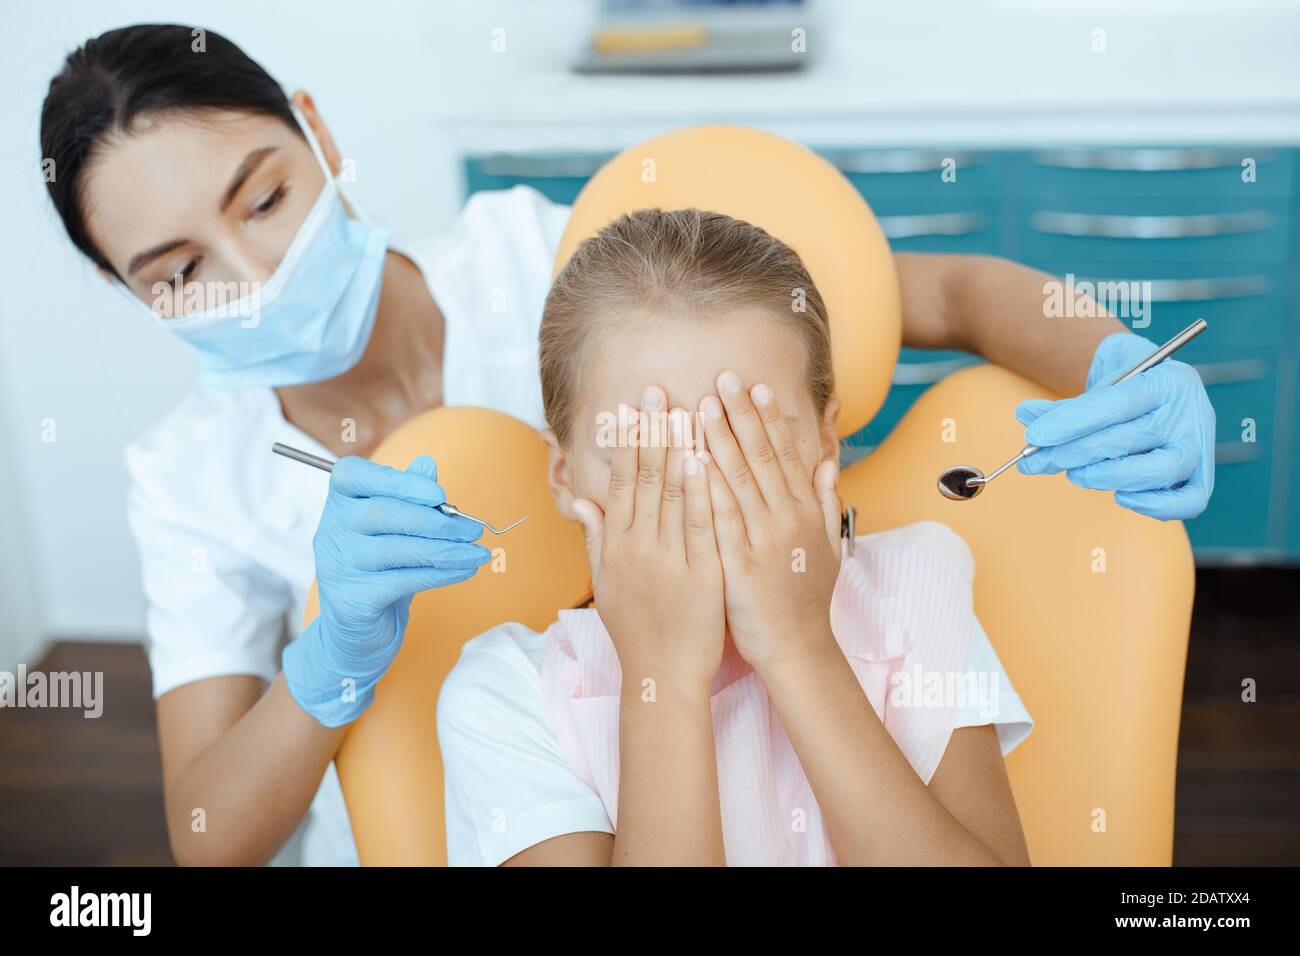 Little child covers face with hands, sits in medical chair with woman doctor holds instruments for examining patient Stock Photo